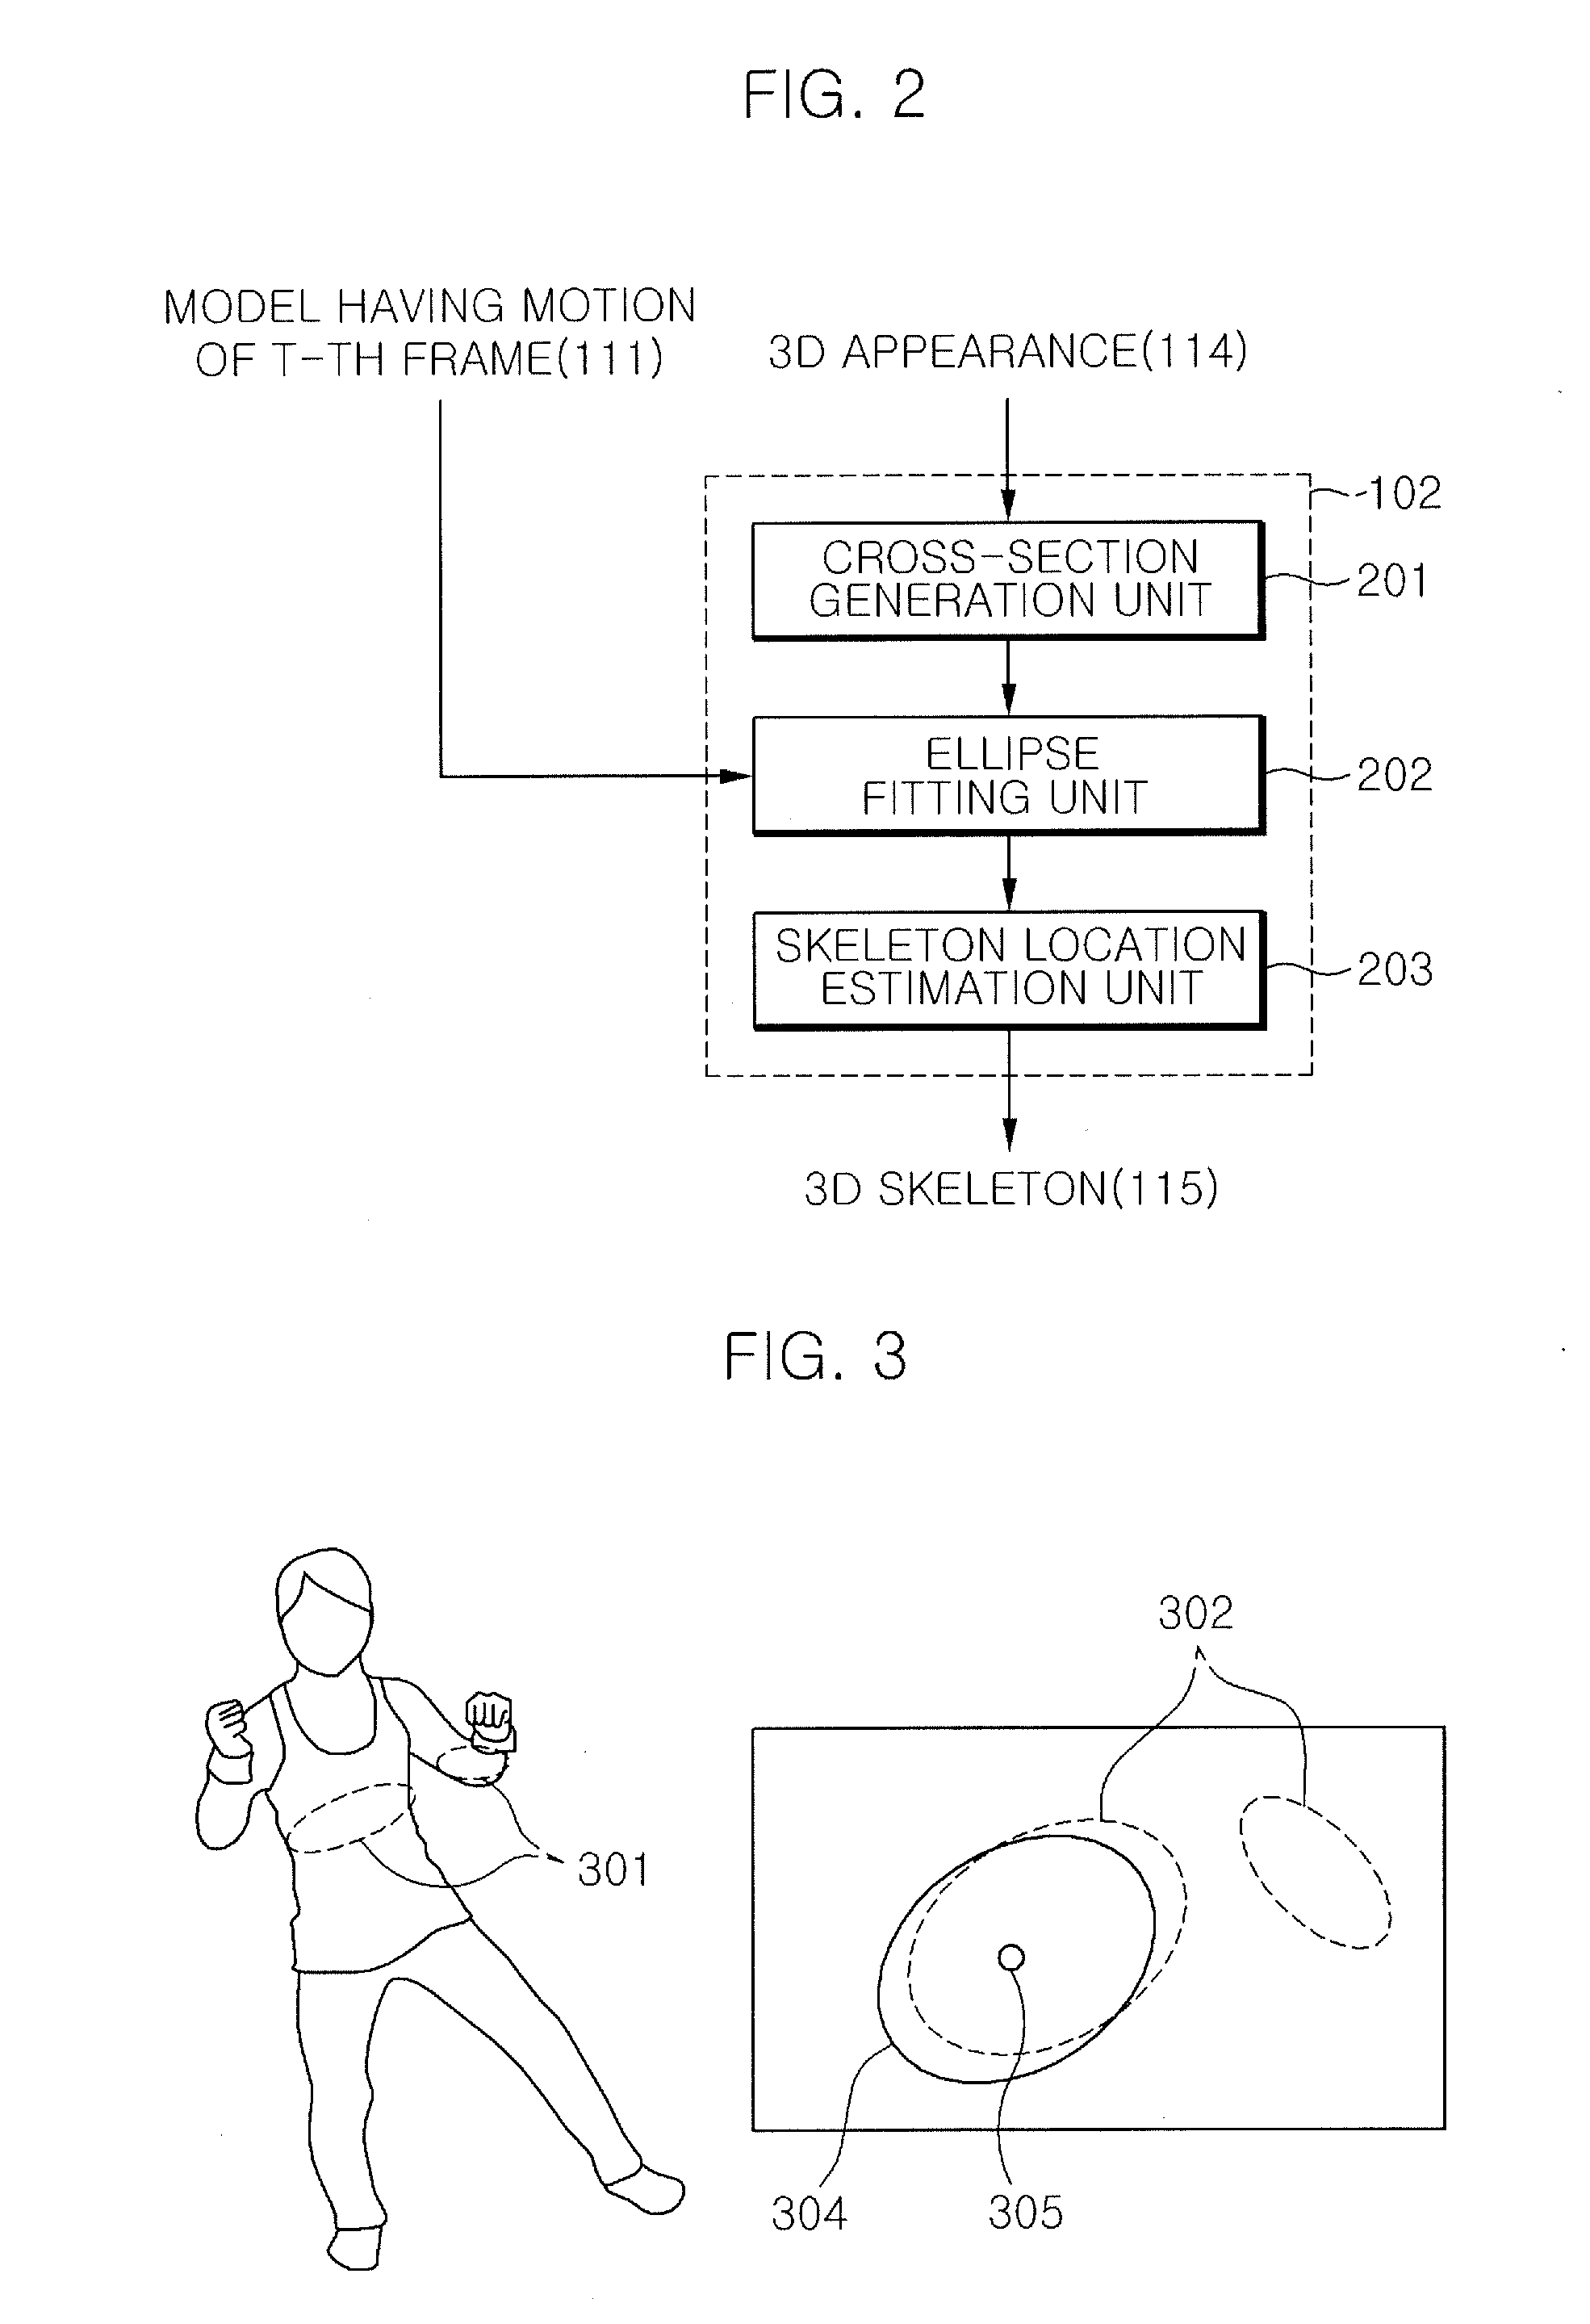 Motion capture apparatus and method